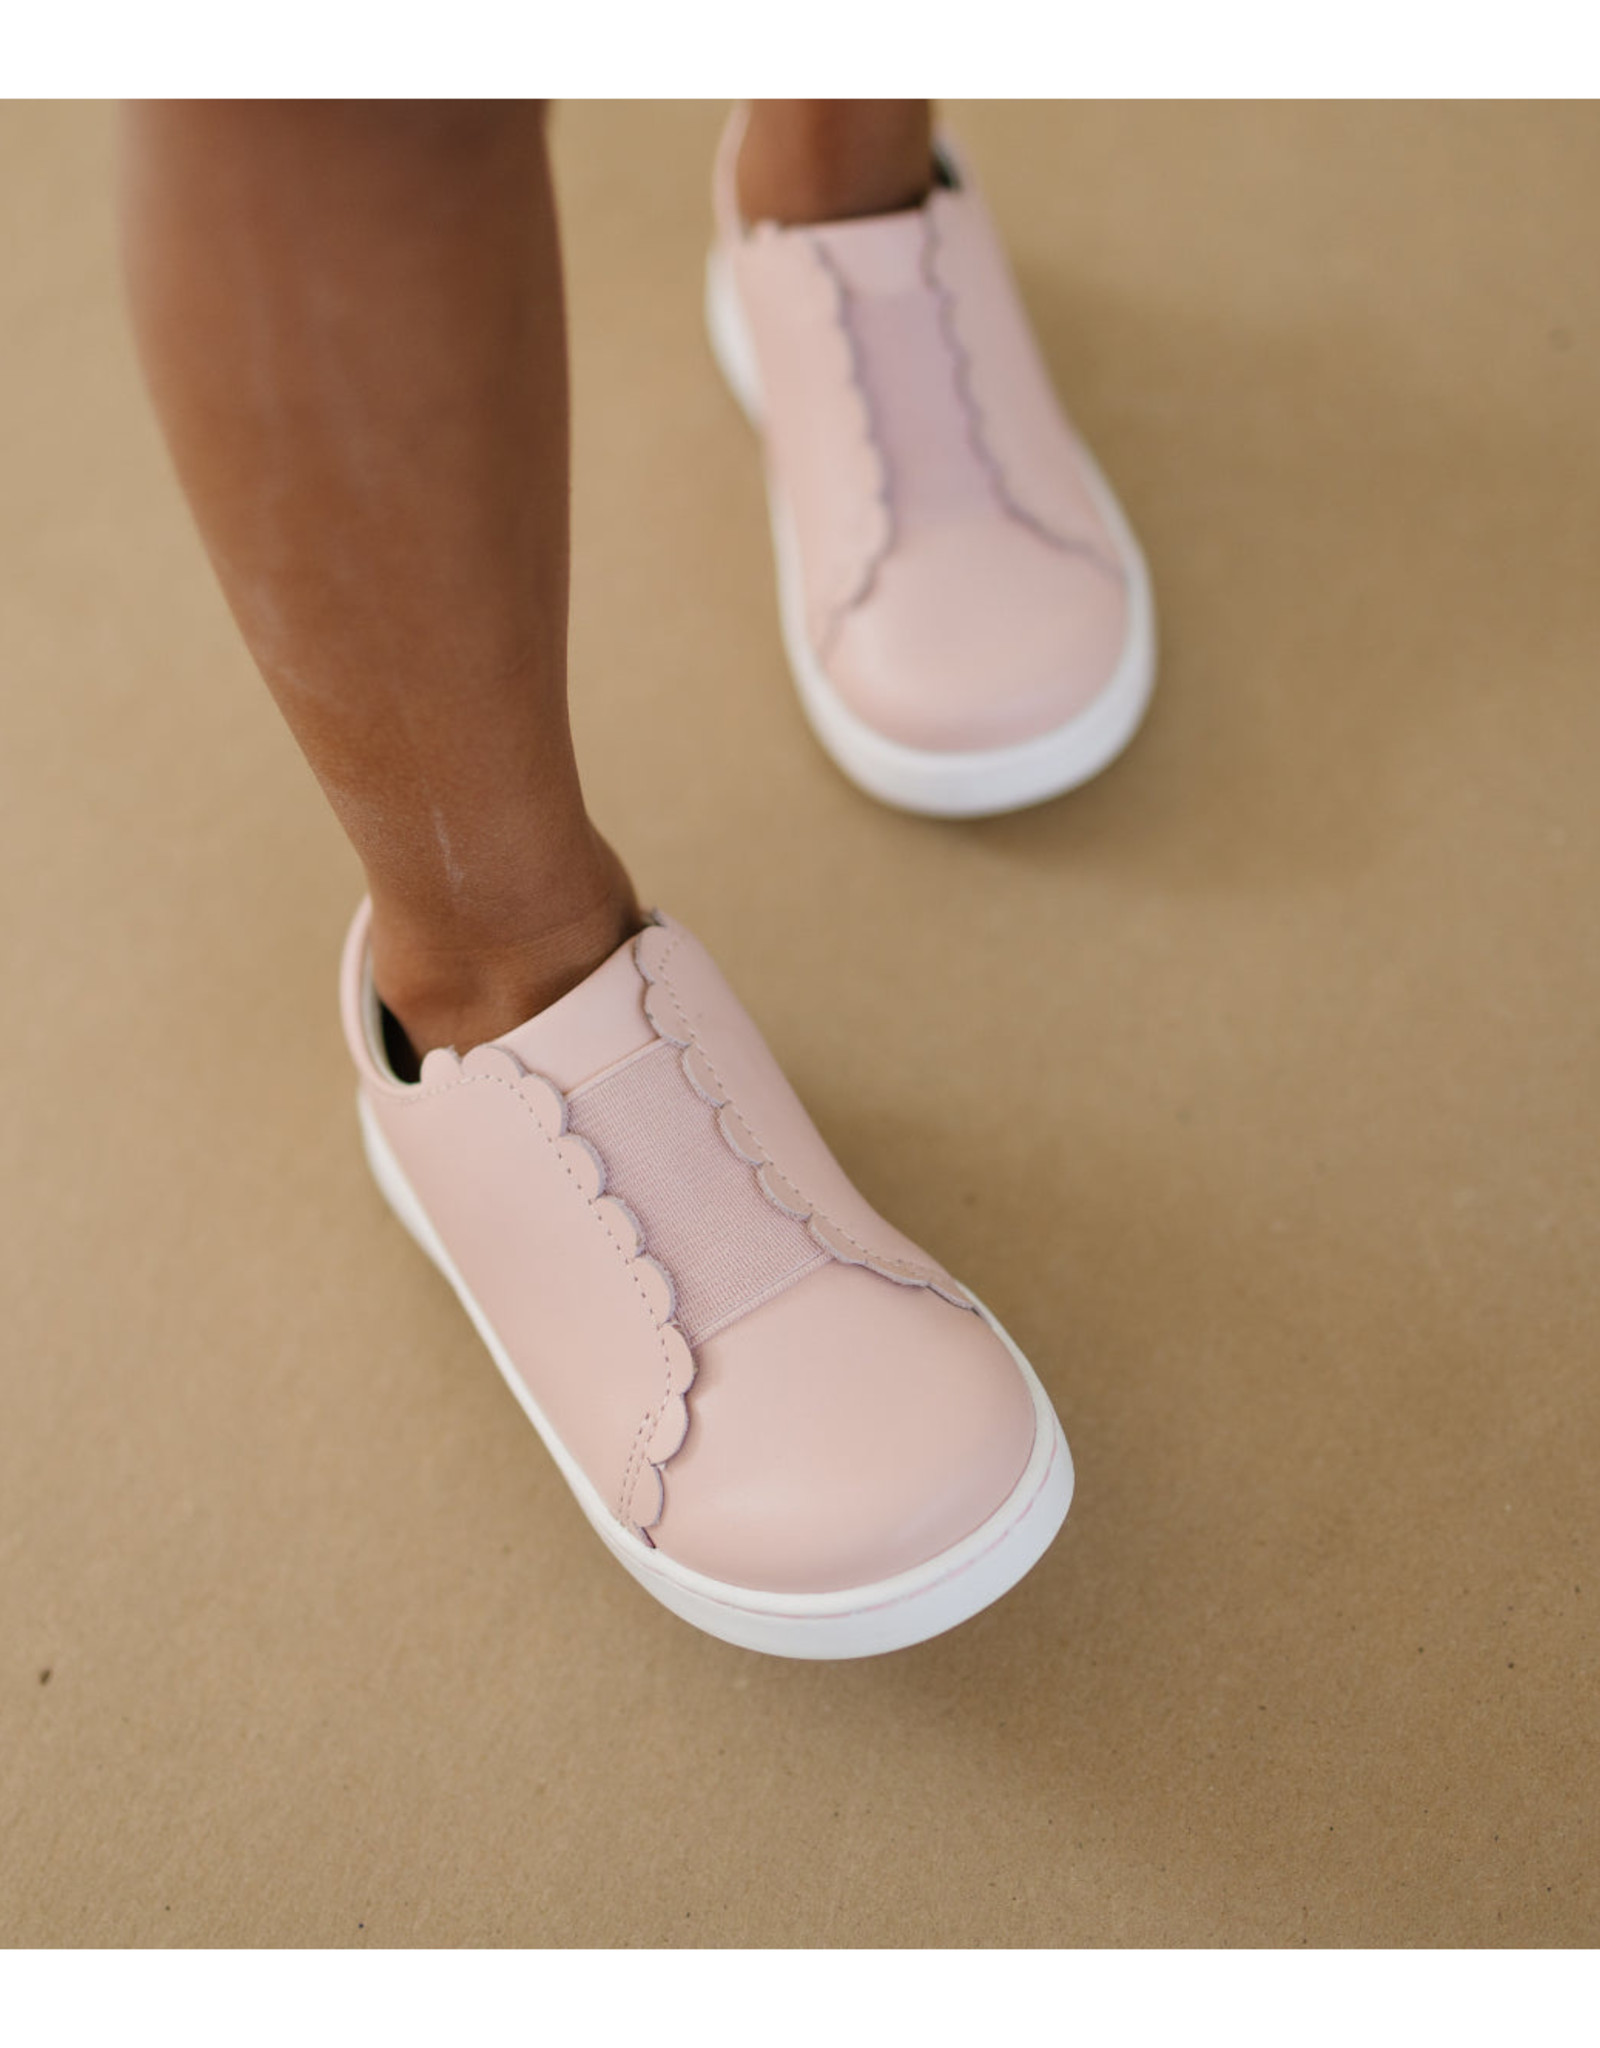 L'Amour 682 Phoebe Sneaker Pink